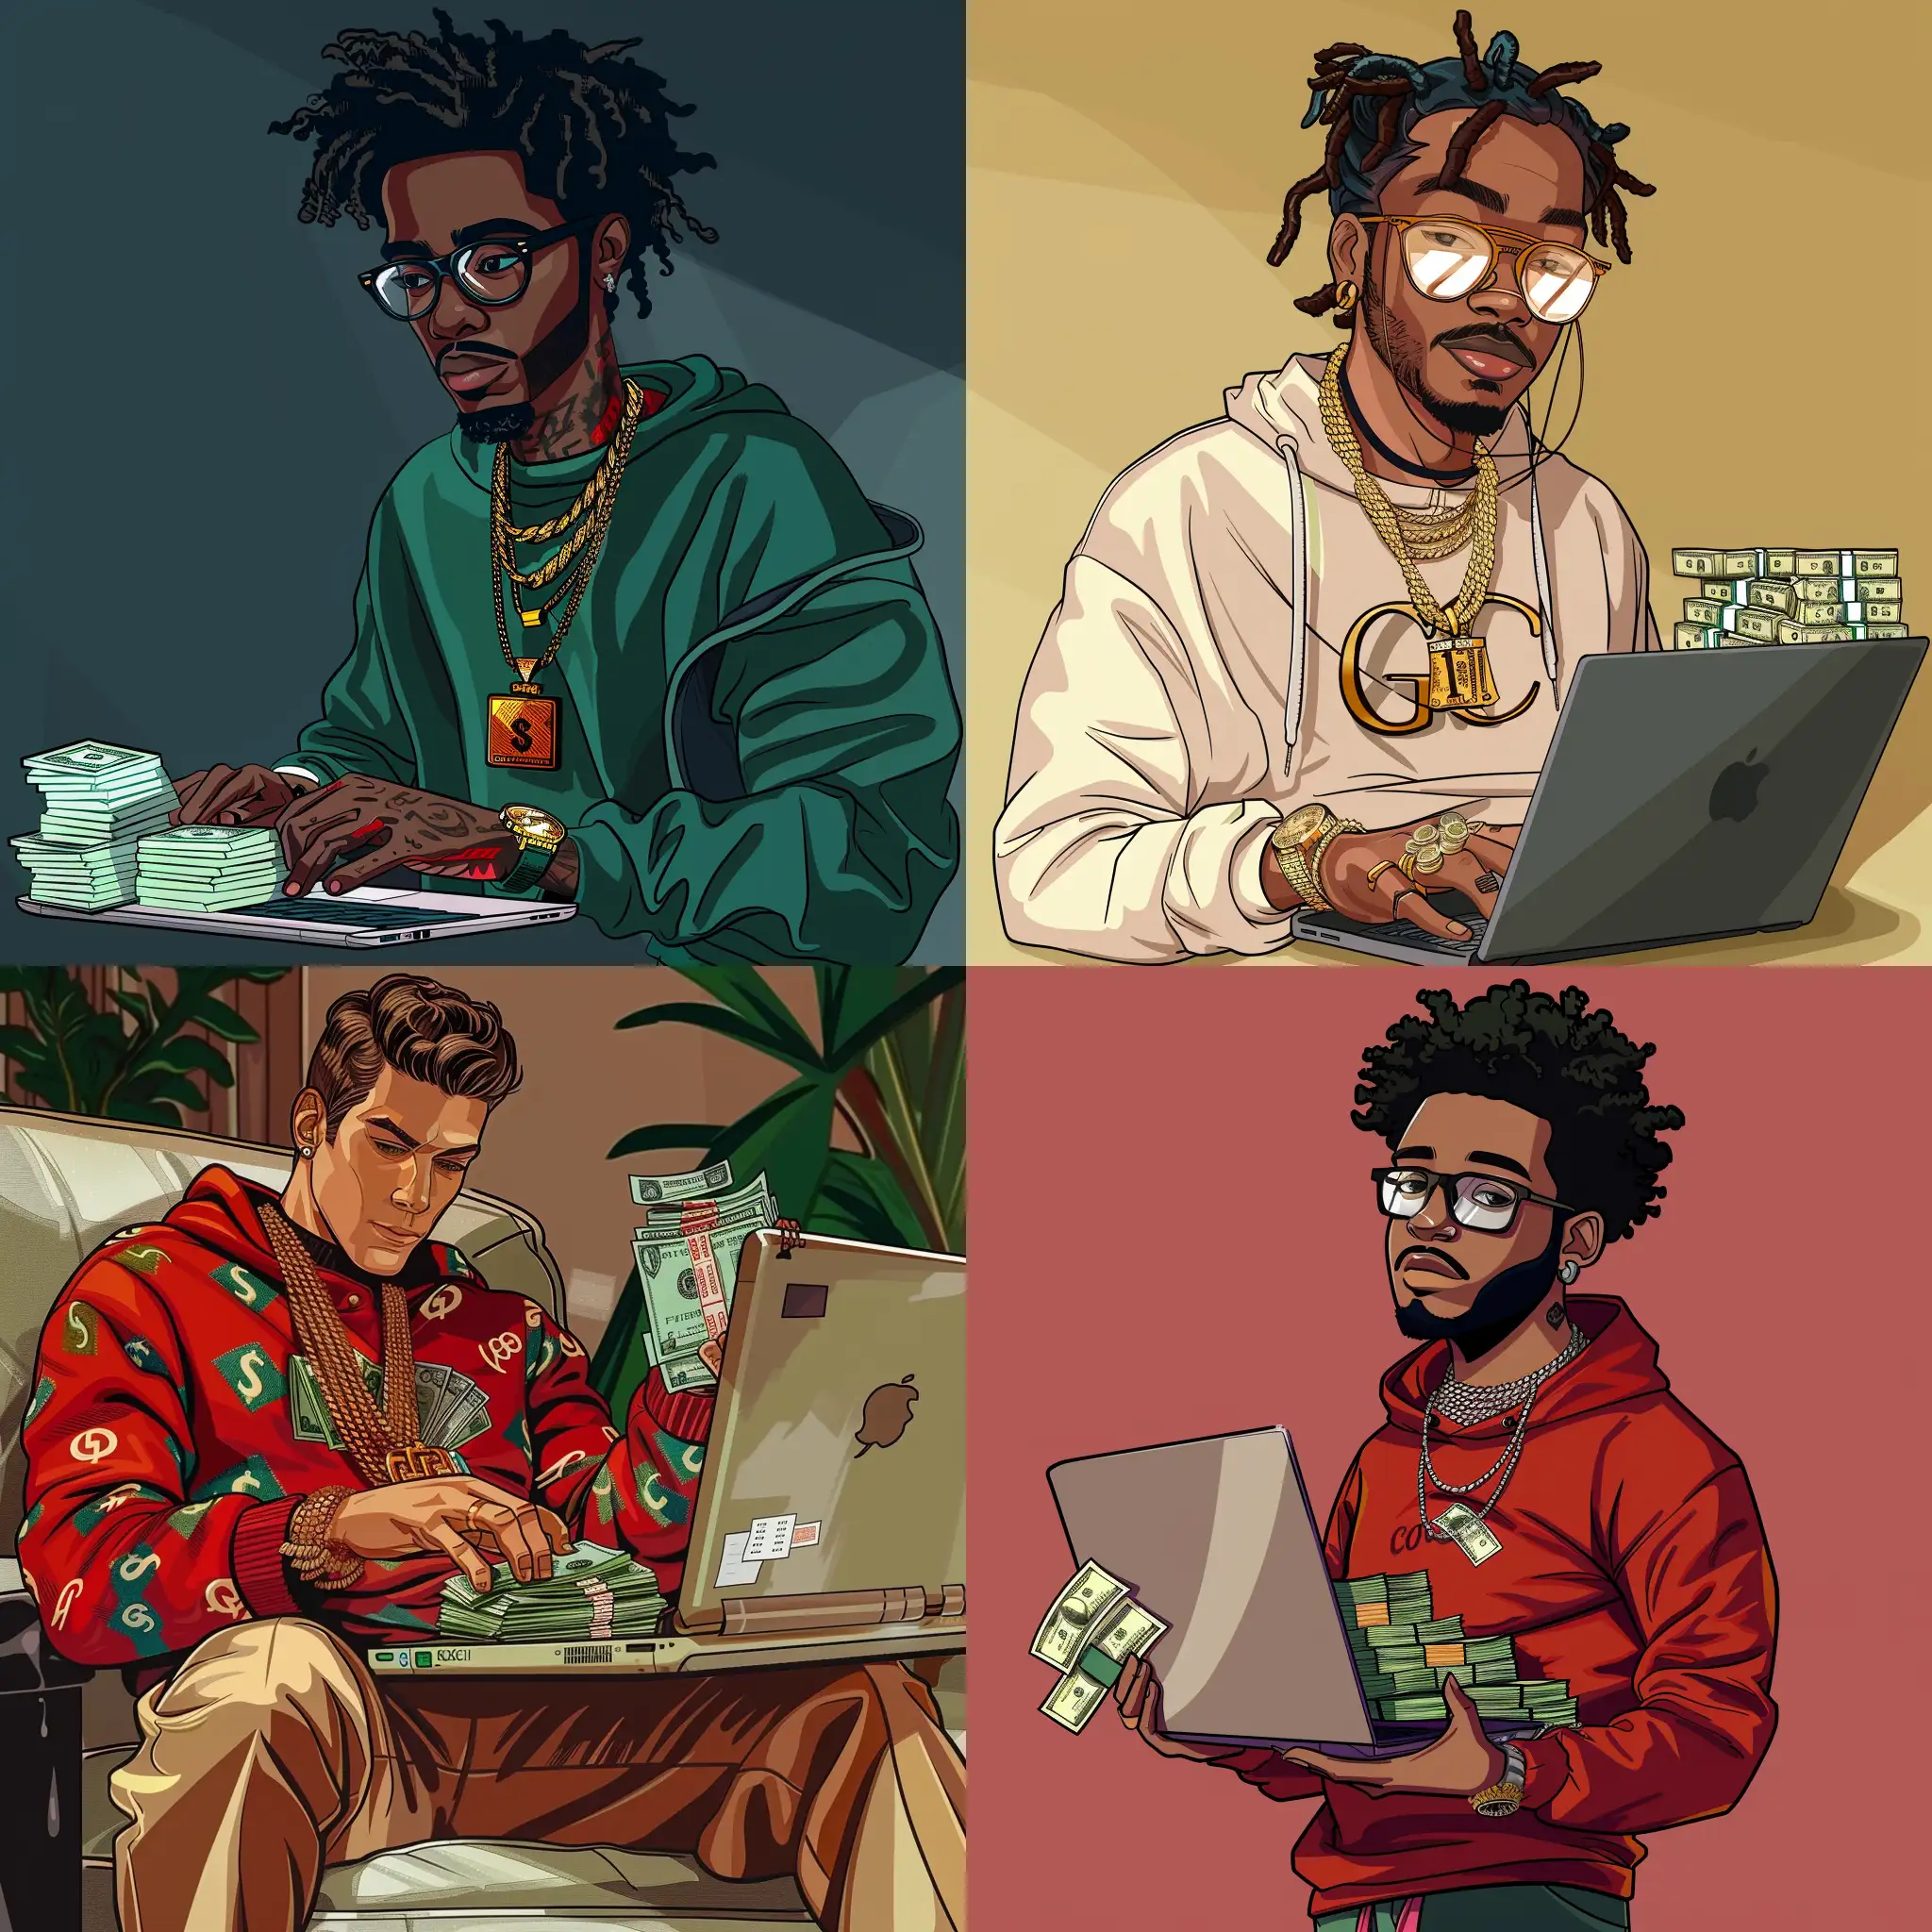 create me  a cartoon OF RILEY FREEMAN WITH A GUCCI SWEATER, STACKS OF MONEY IN HIS HAND AND A LAPTOP WITH STOCKS IN HIS OTHER HAND